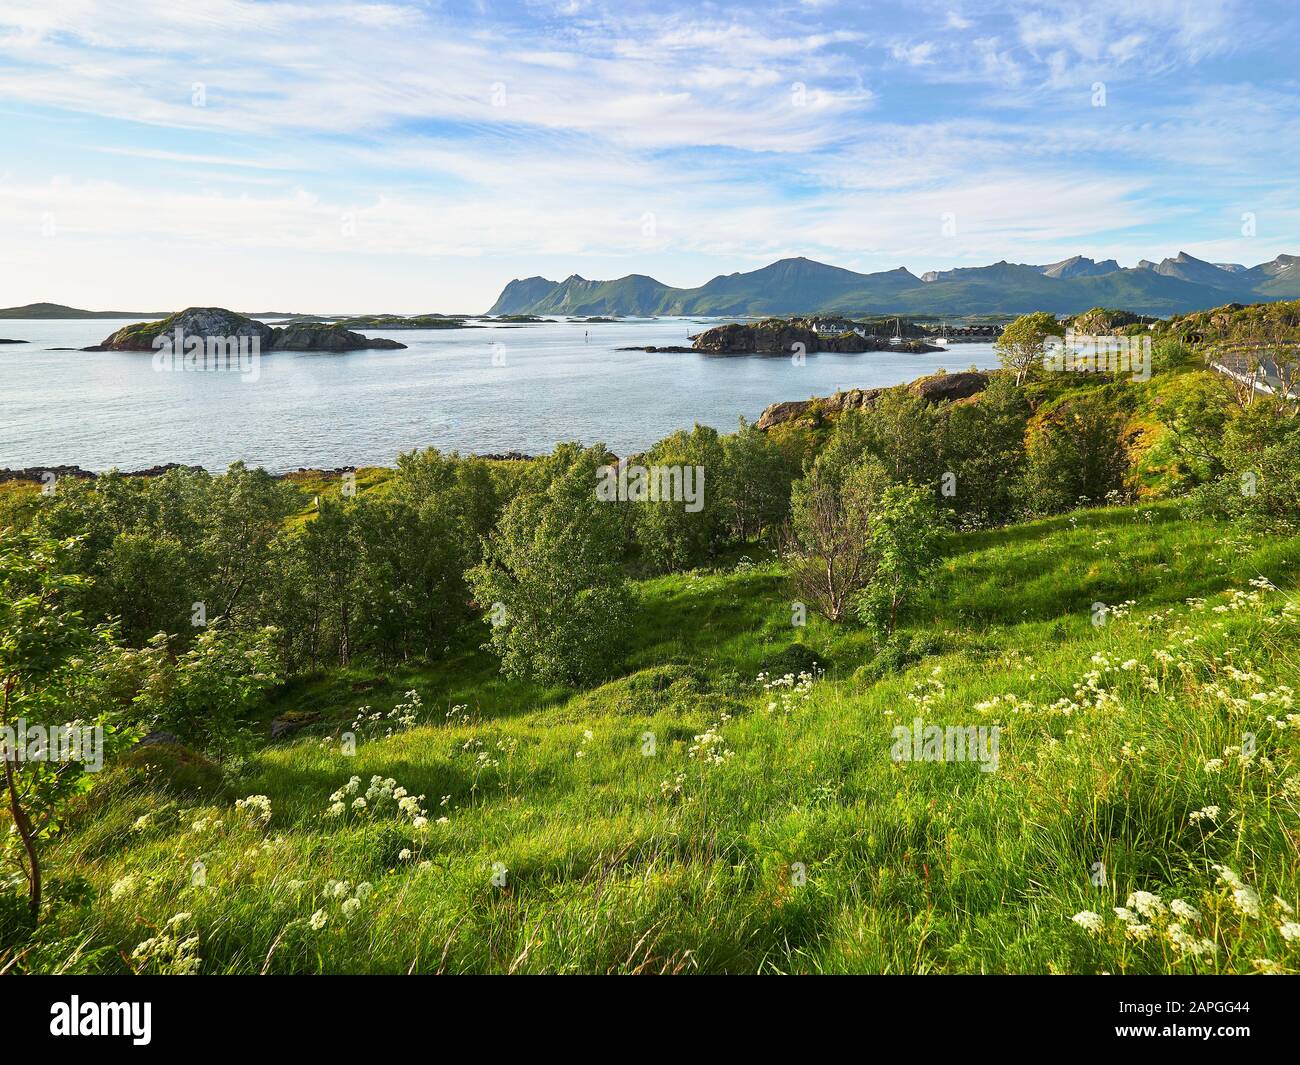 Fjord seascape view at the famous tourist attraction Hamn Village, Senja island, Troms county - Norway Stock Photo